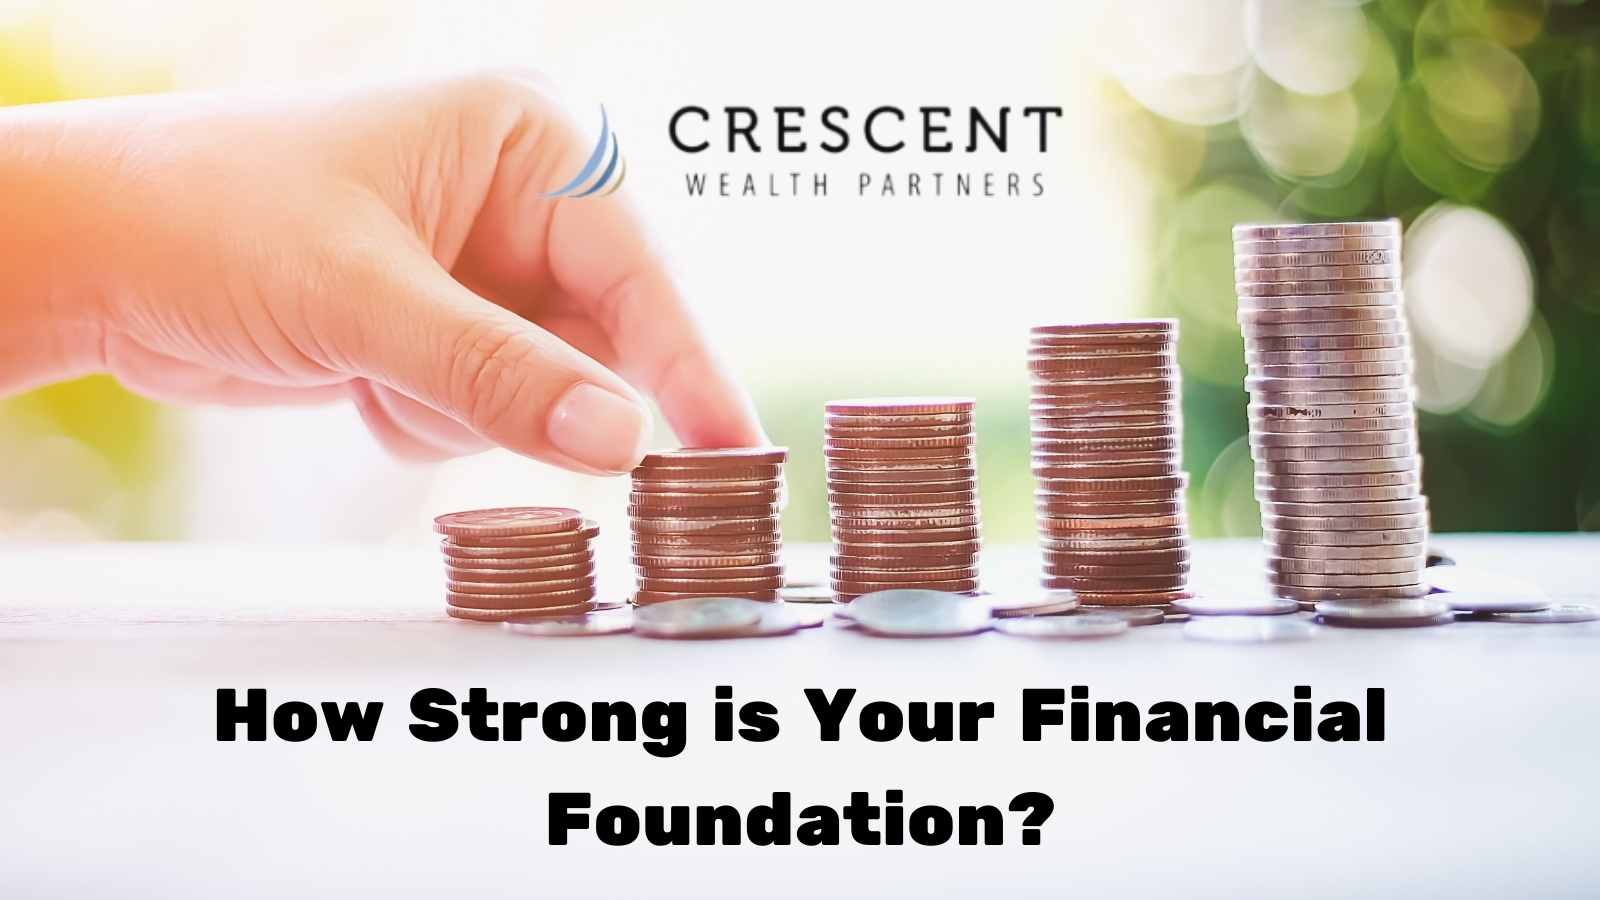 How Strong is Your Financial Foundation?